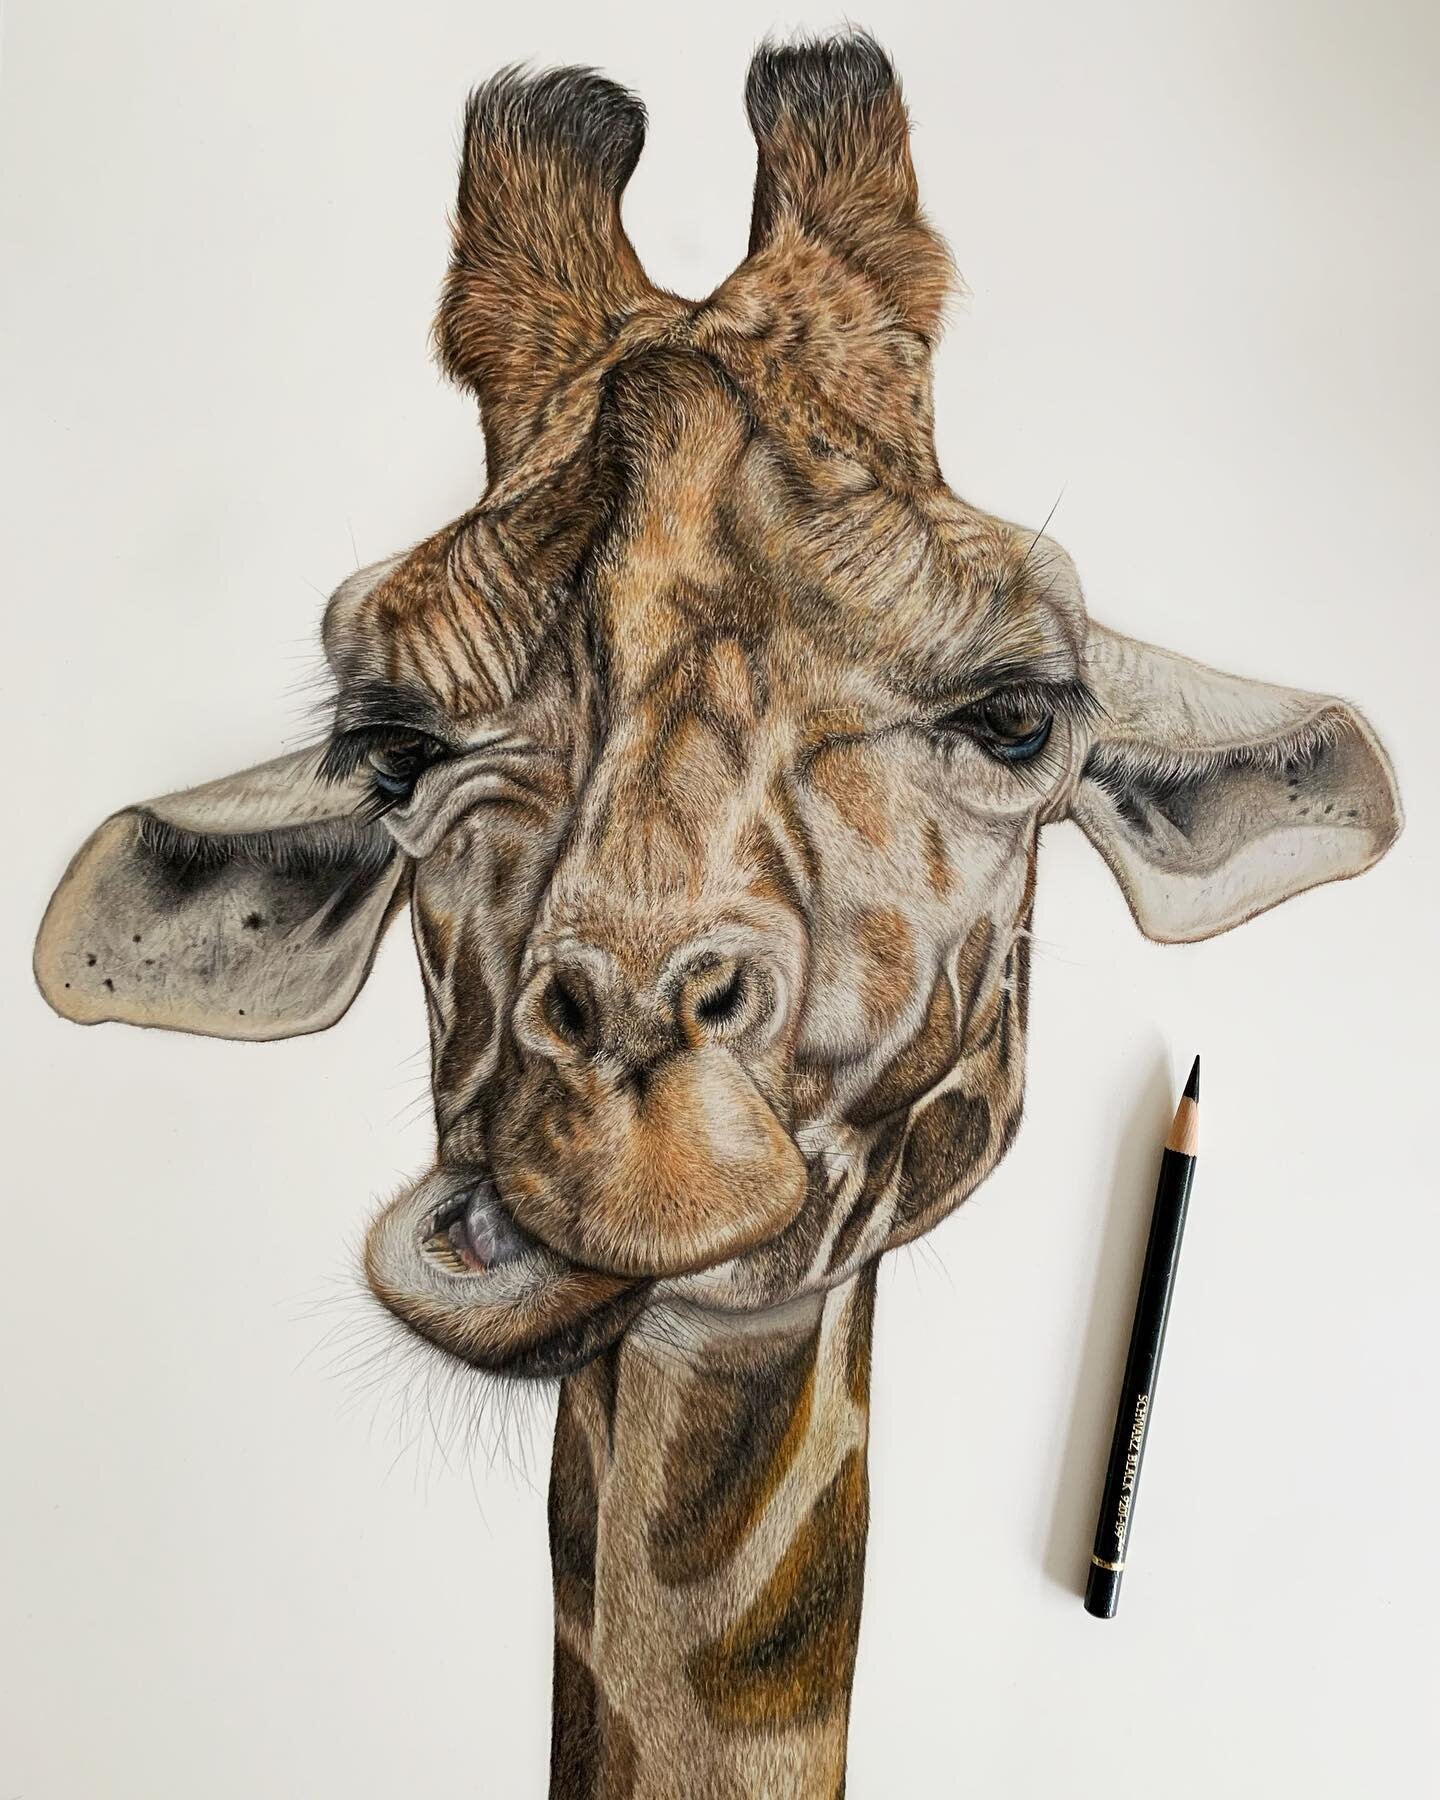 &lsquo;Stand Tall&rsquo; is the first original I&rsquo;d love to introduce you too 🦒❤️
 
This gorgeous girl took me around 160 hours to complete over the last few months, but I originally fell in love with her reference back in 2015 and knew I had t